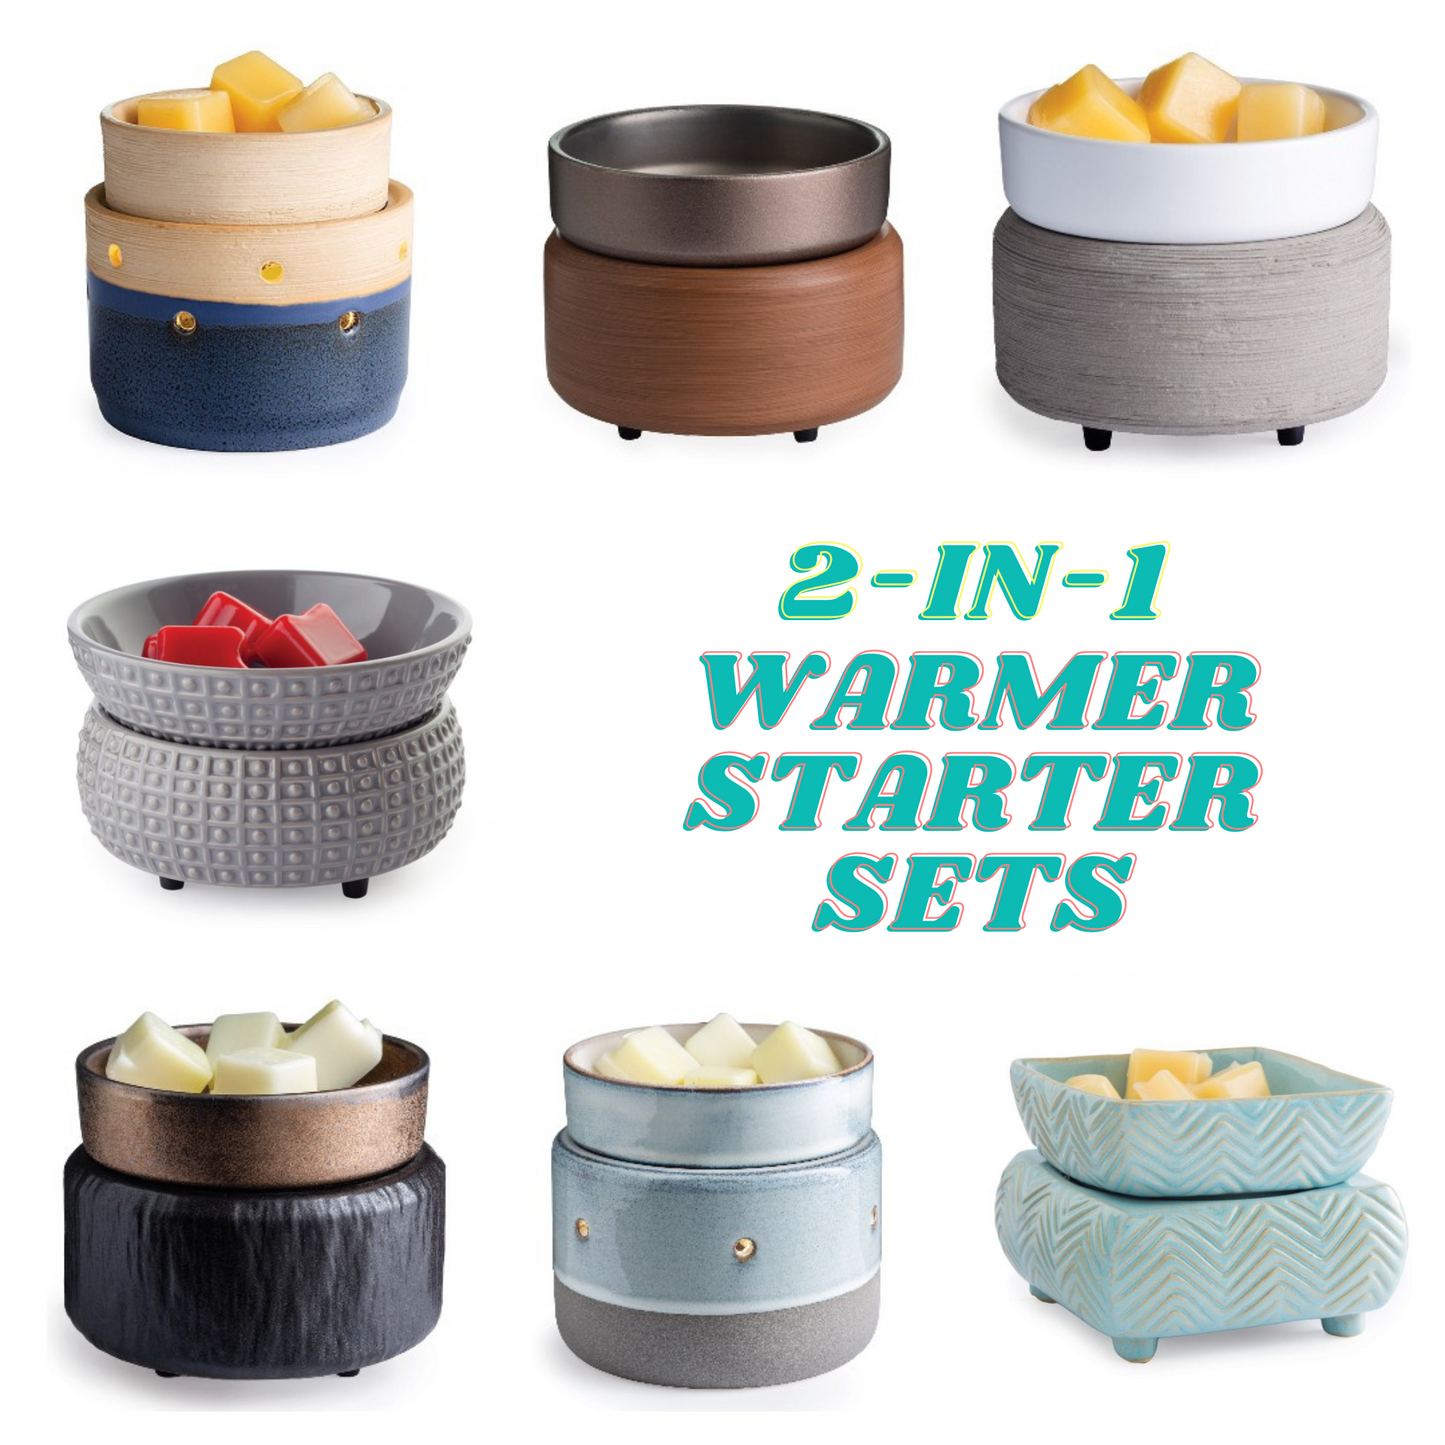 2 in 1 candle & wax warmer starter set *NEW DESIGNS*